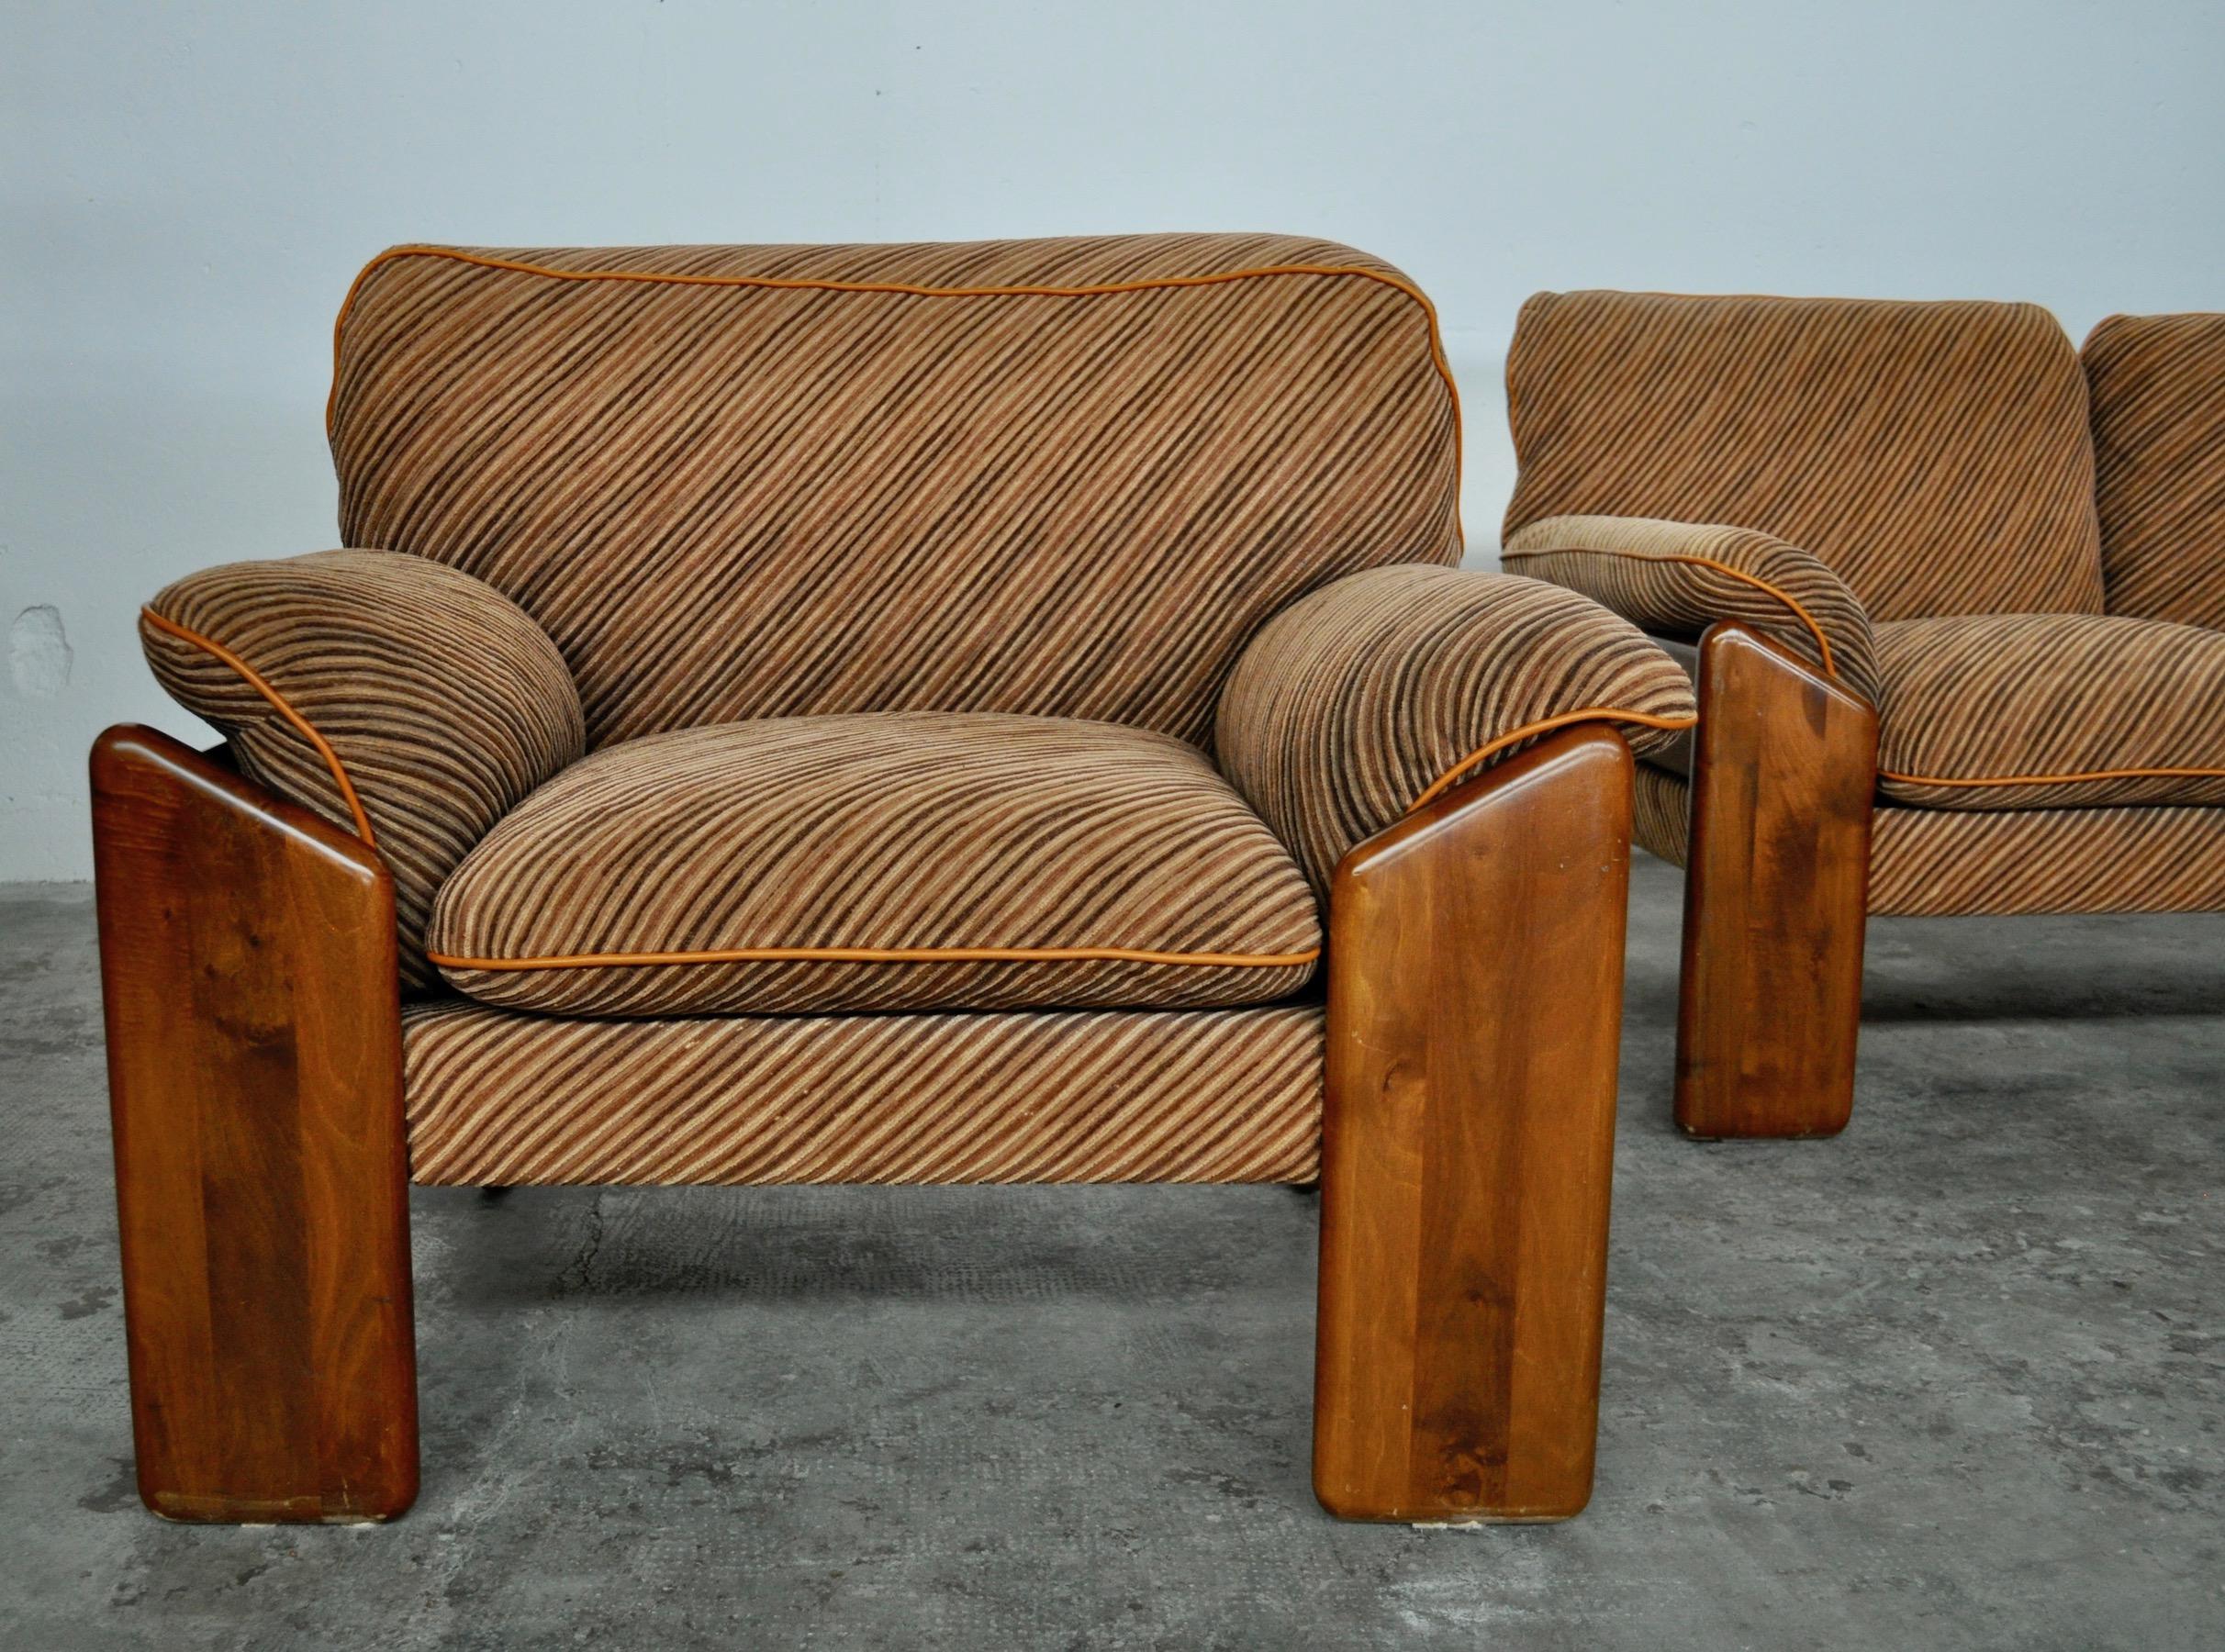 Sofa and Armchairs in Walnut Wood by Mobil Girgi, 1970s For Sale 1